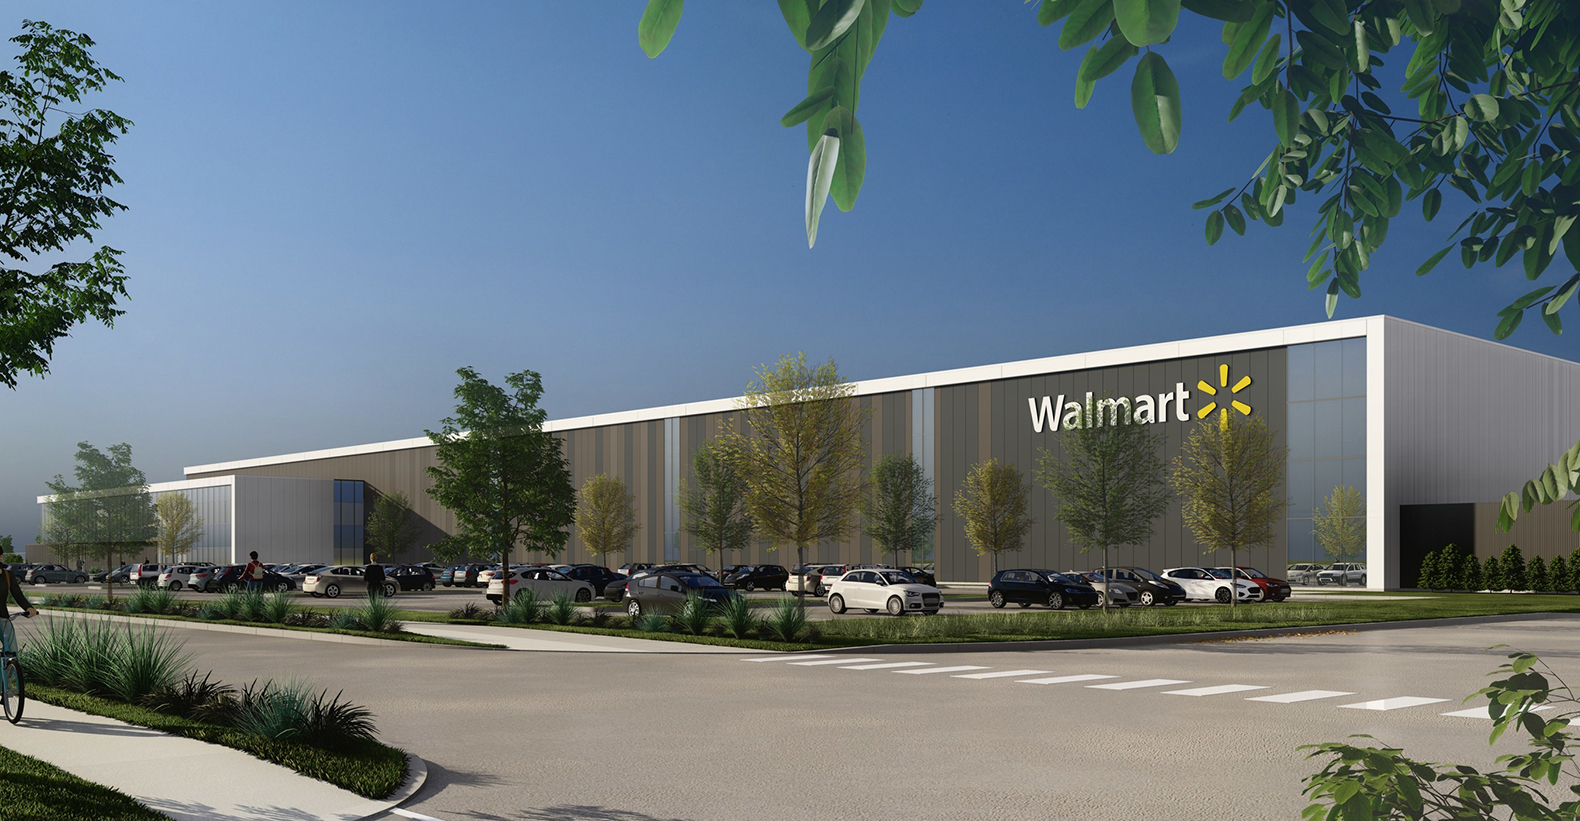 https://www.supermarketnews.com/sites/supermarketnews.com/files/Walmart_Canada_Corp__Walmart_Canada_to_build_its_first_ever_fulf.jpg